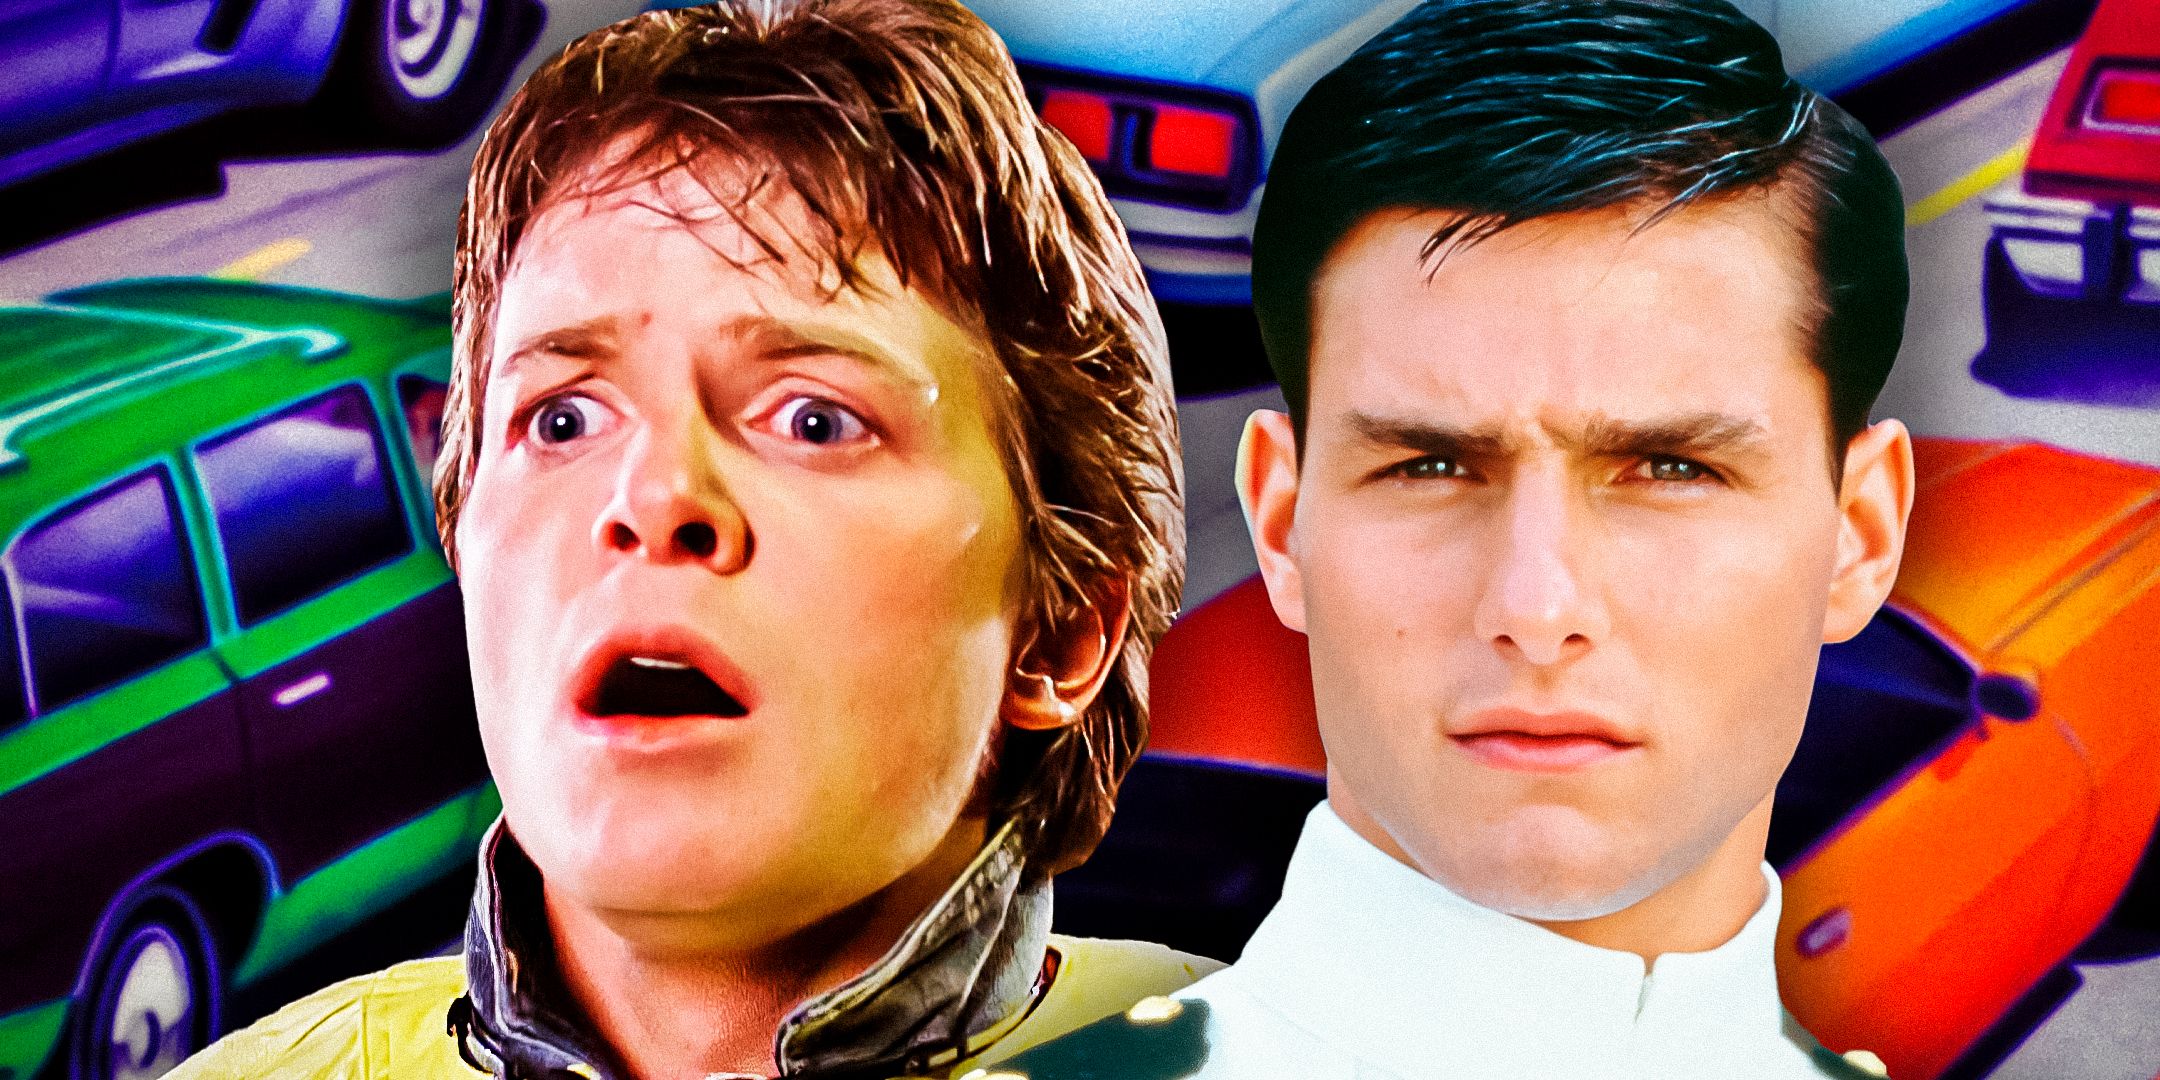 Maverick-From-Top-Gun-(1986)-and-Marty-McFly-from-Back-to-the-Future-(1985)